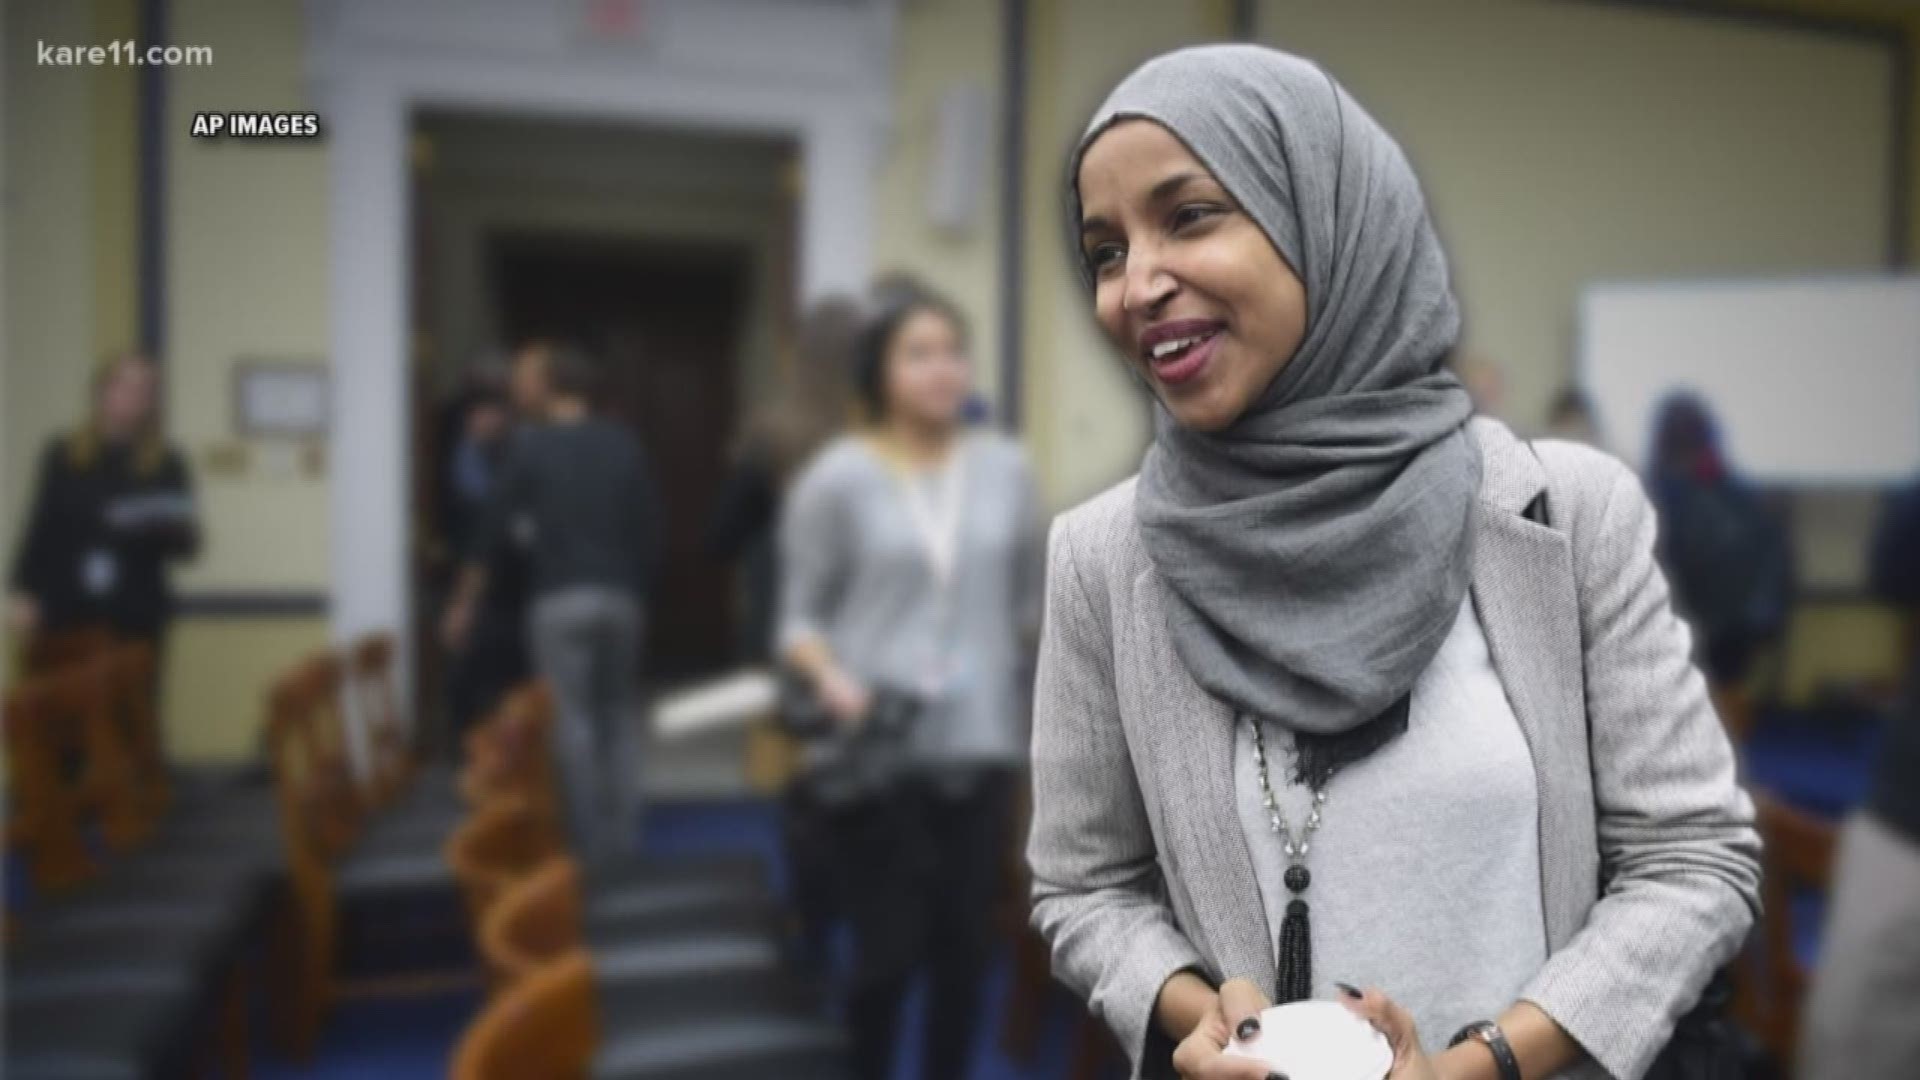 It has been a turbulent week for Congresswoman Ilhan Omar. Lots of stories flying around about campaign finance and tax filings and whatever else...So we wanted to sort out what we know and what we don't know about this.